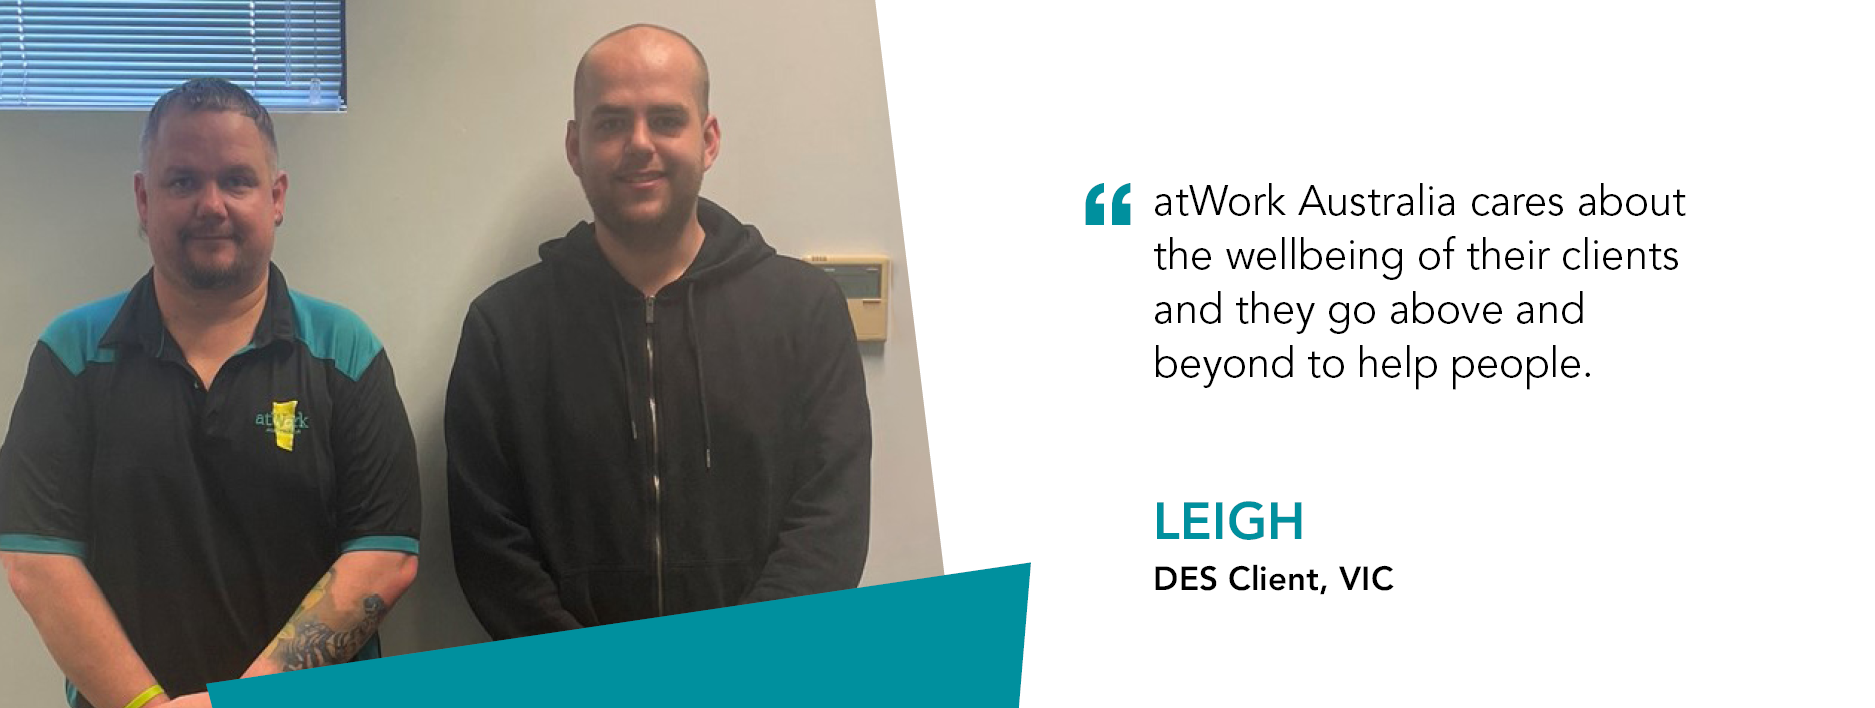 Leigh stands with Job Coach Brad. Quote reads "atWork Australia really cares about the wellbeing of their clients and go above and beyond to help people." said client Leigh from Victoria